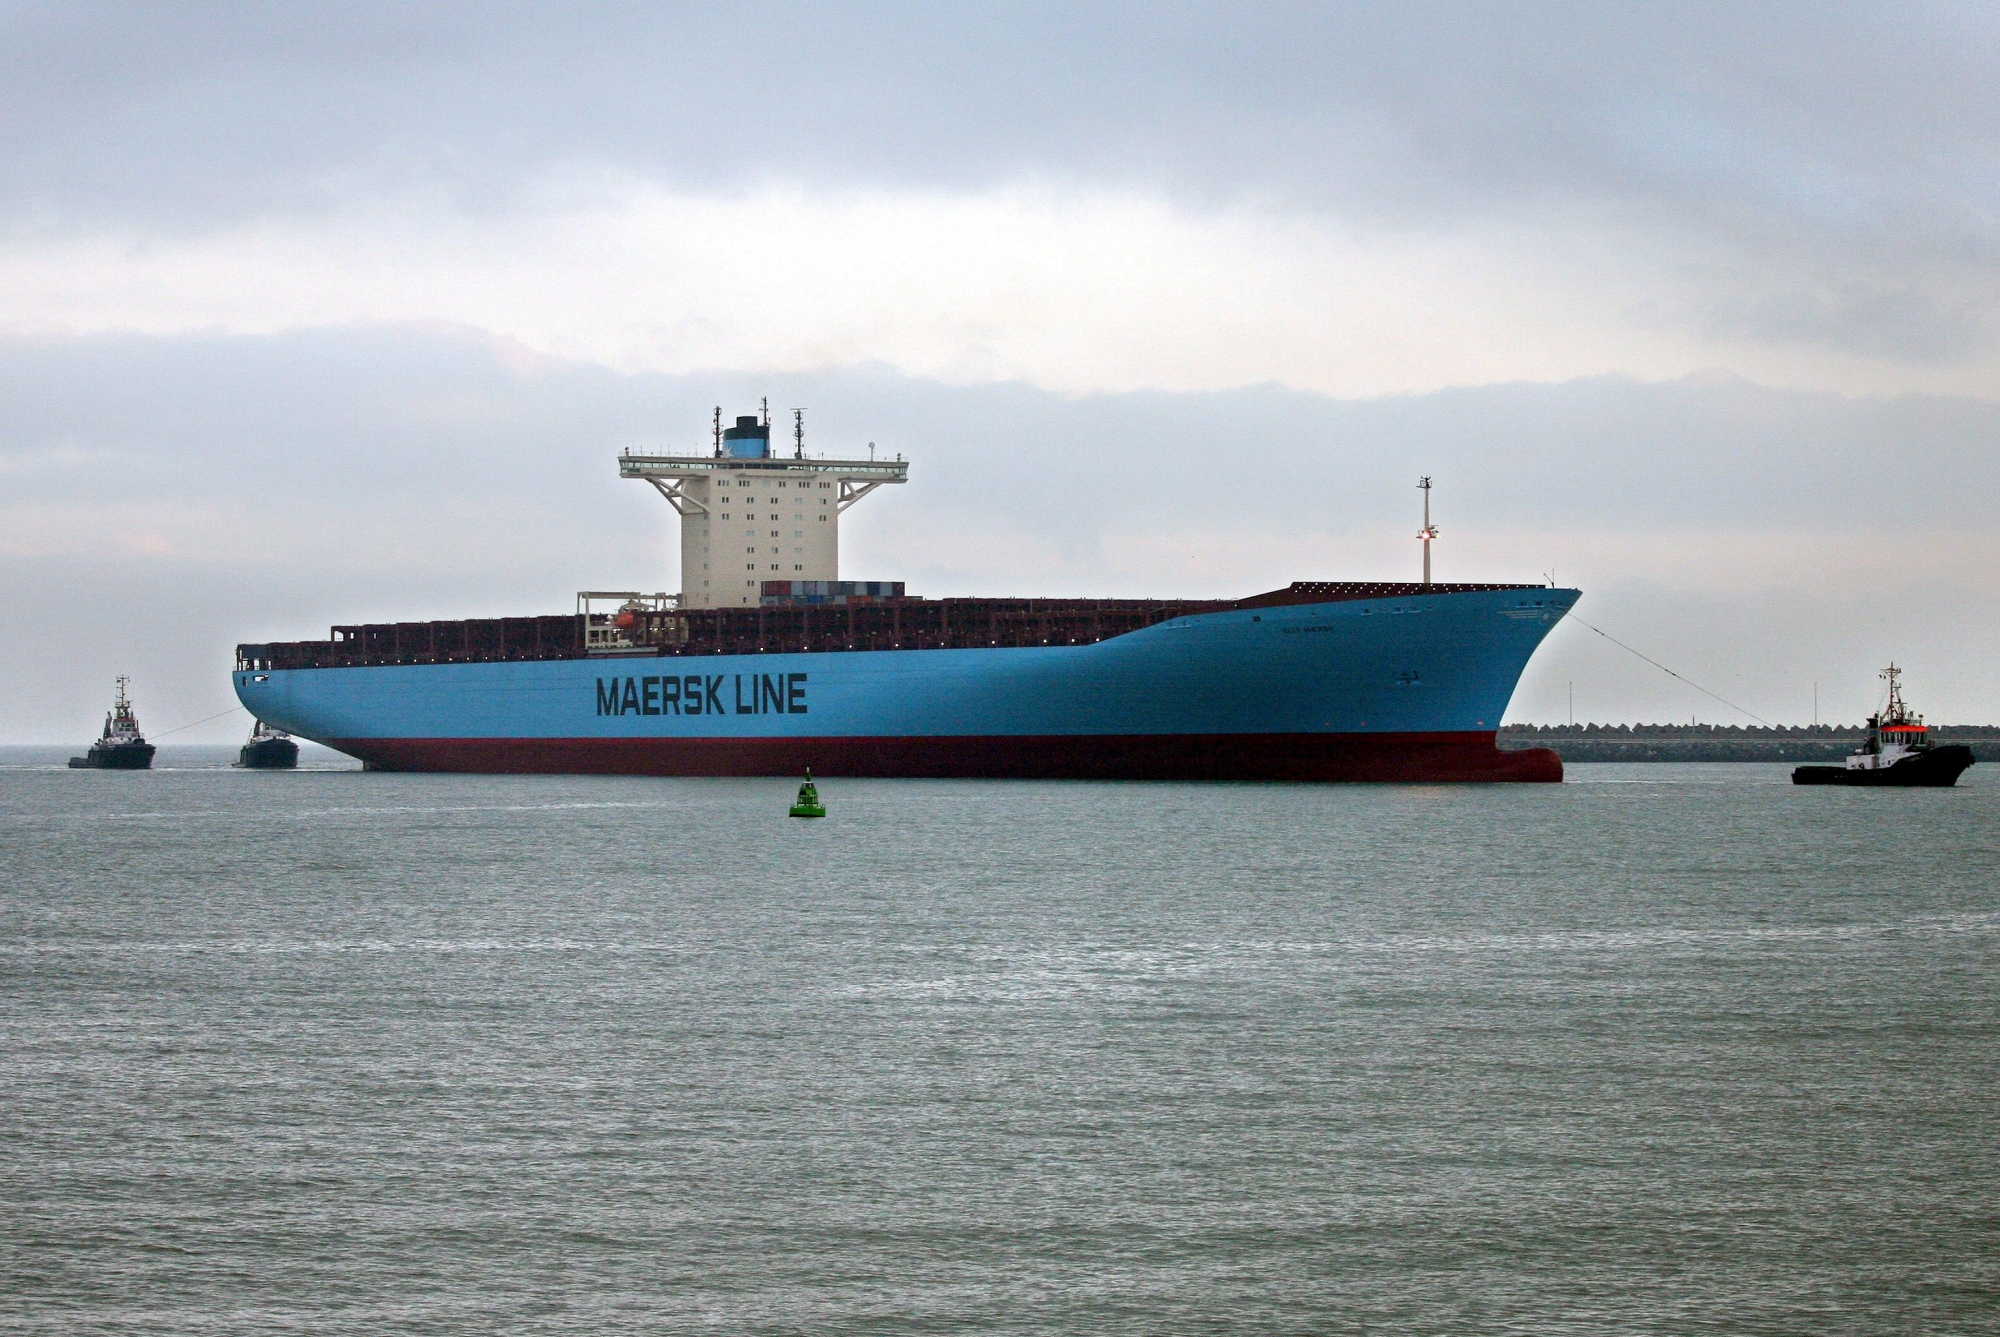 A picture of the large containership m/v Elly Maersk of Maersk Line arriving at the APM terminal in the port of Zeebrugge, Belgium, 22 September 2007. The Elly Maersk is the biggest containership in the world.  (KEYSTONE/EPA/PETER DECONINCK) BELGIUM OUT BELGIUM CONTAINERSHIP